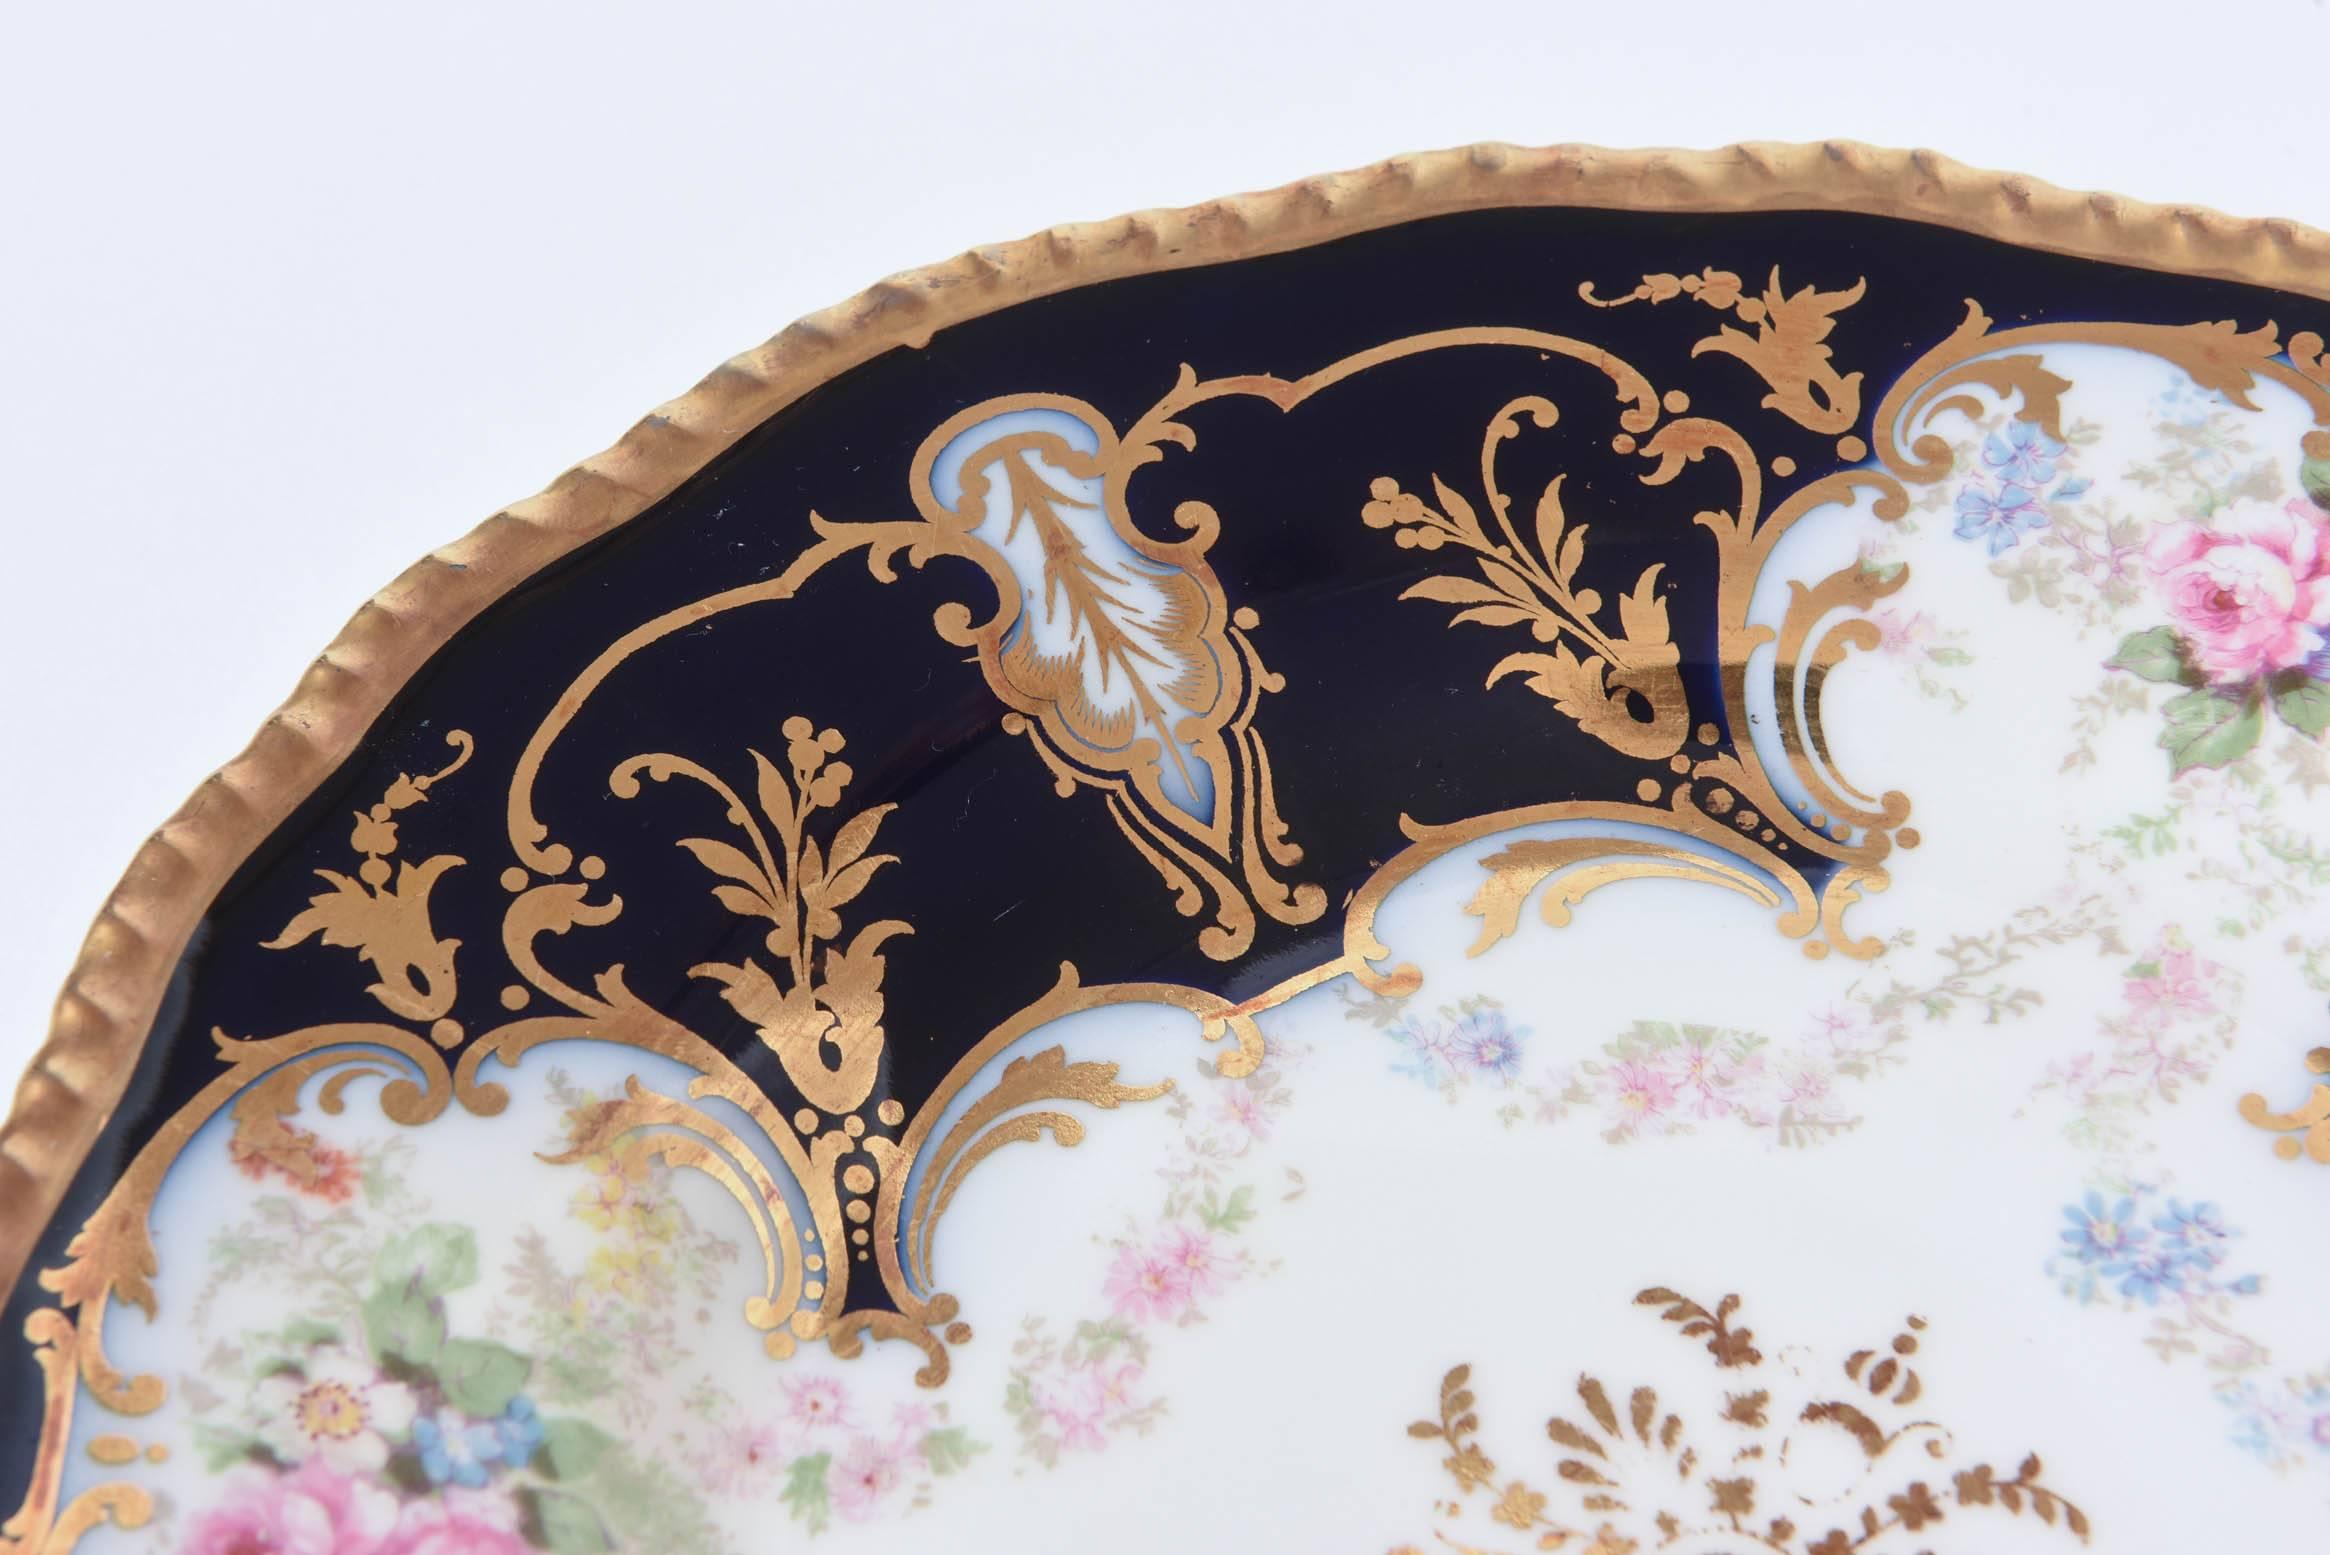 We love the scalloped shape and nice gadroon edging to these handsomely painted plates. There is a delightful centre gilt medallion and the design features elaborate cartouches in the cobalt blue shoulders revealing nicely hand-painted floral